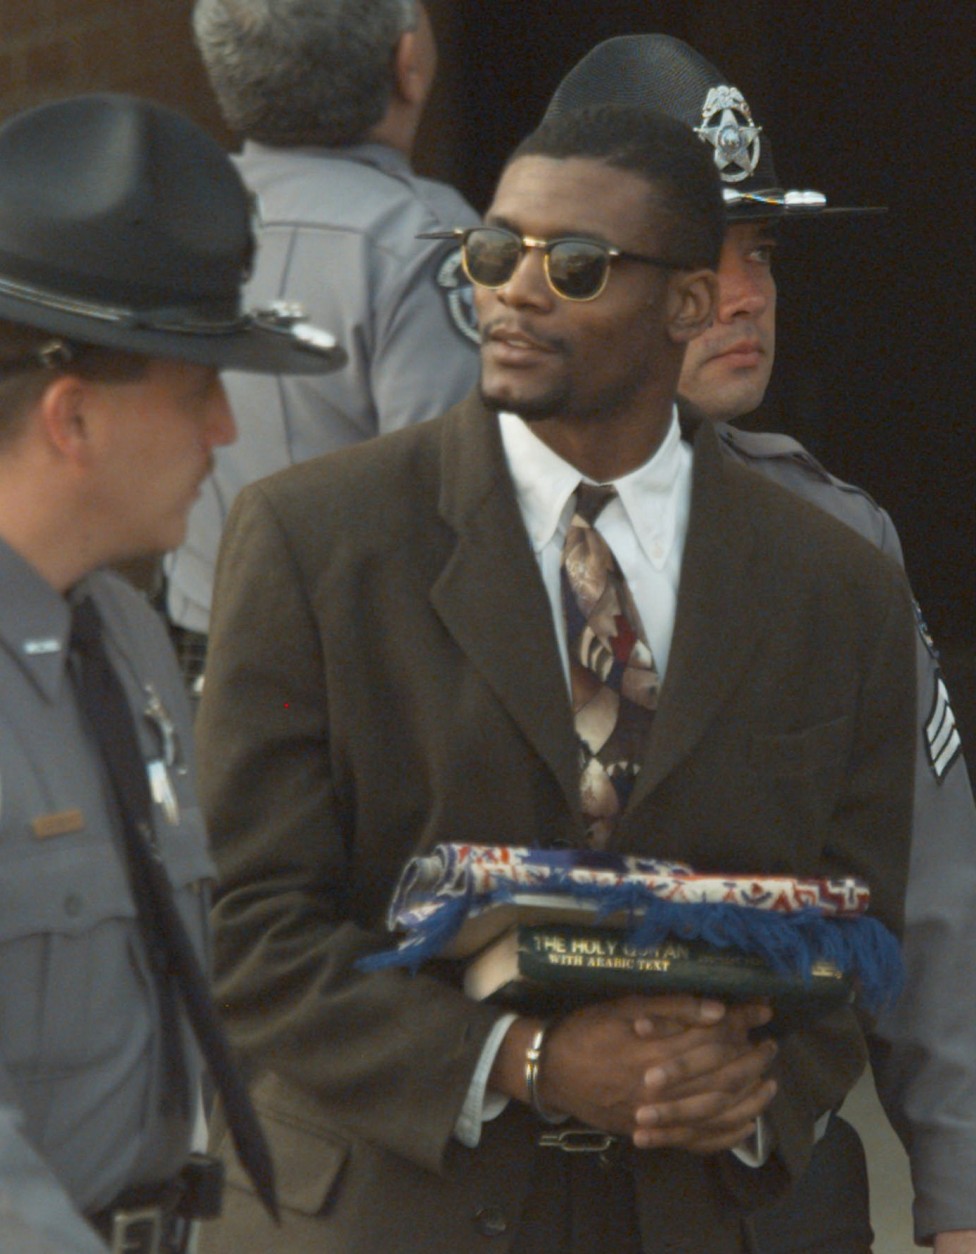 Daniel Green departs the Robeson County Courthouse Thursday Feb. 29, 1996 after being found guilty of the murder of James Jordan, father of basketball star Michael Jordan. (AP Photo/Greg Gibson)